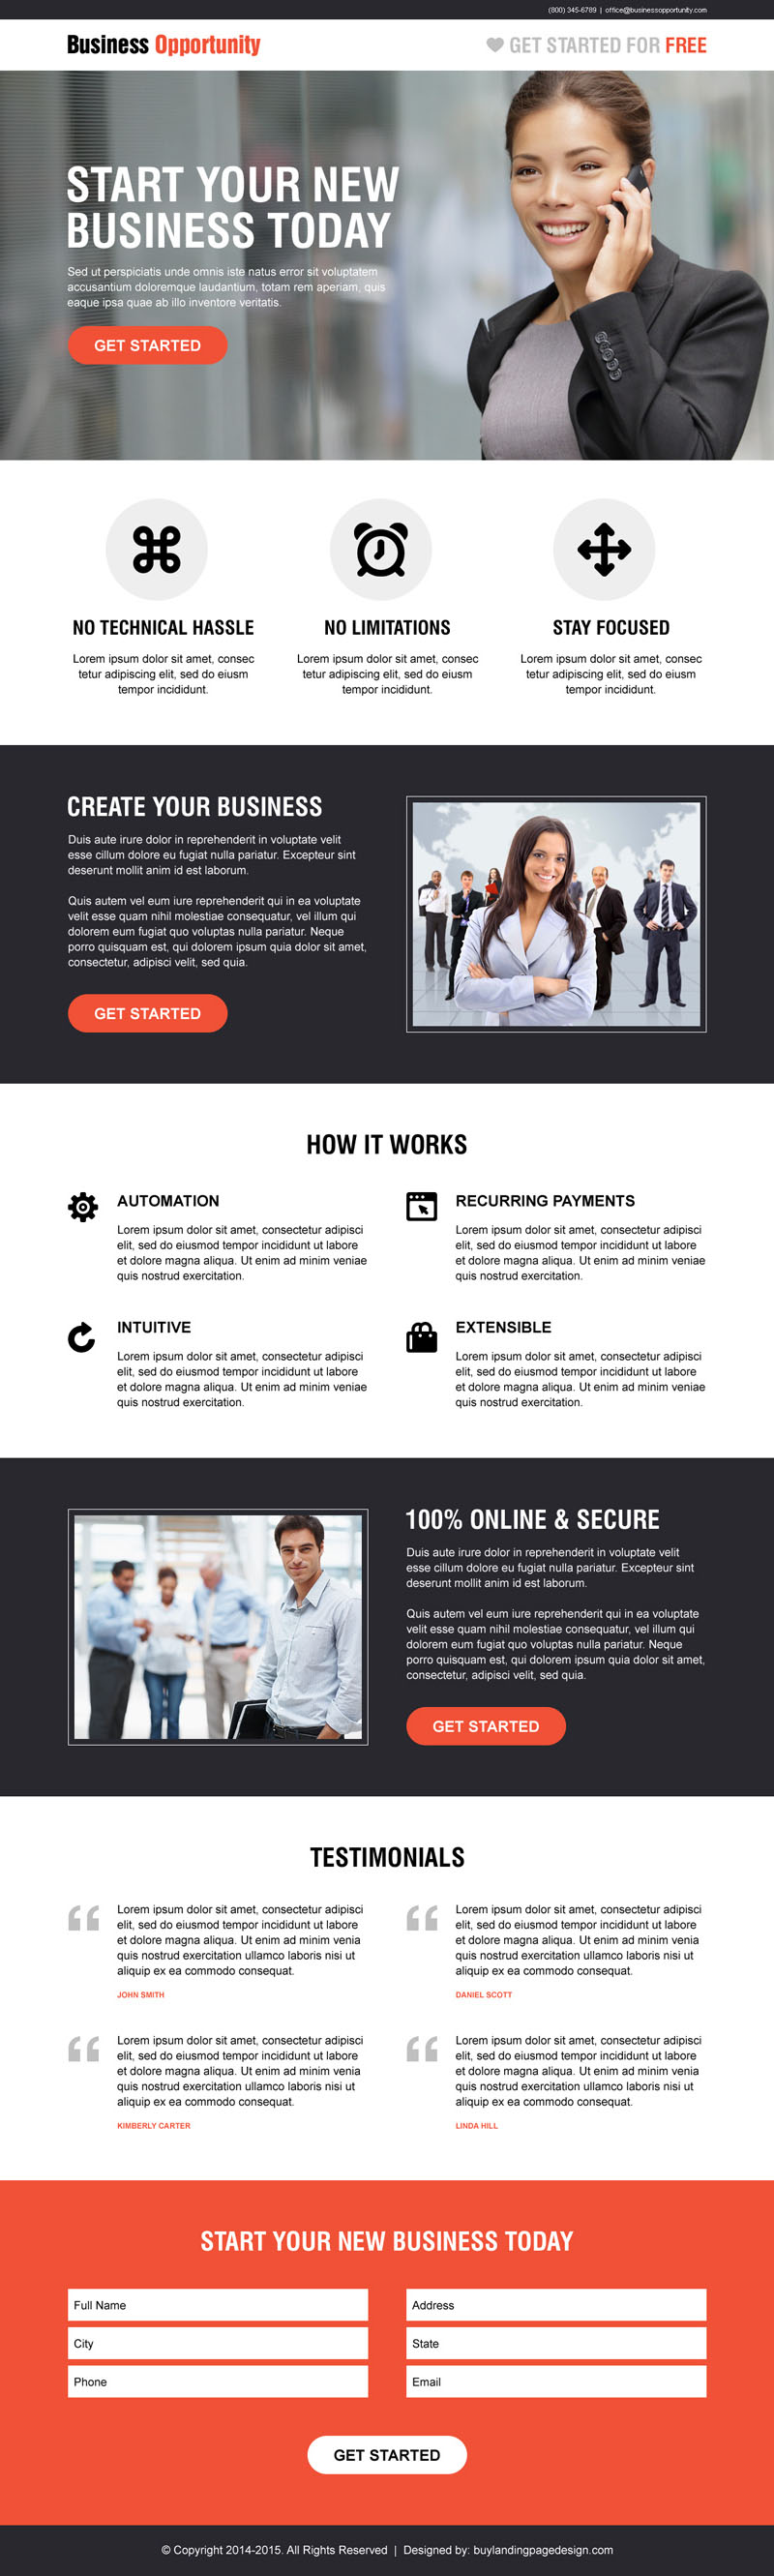 start-your-new-business-cta-and-lead-capture-landing-page-design-template-029